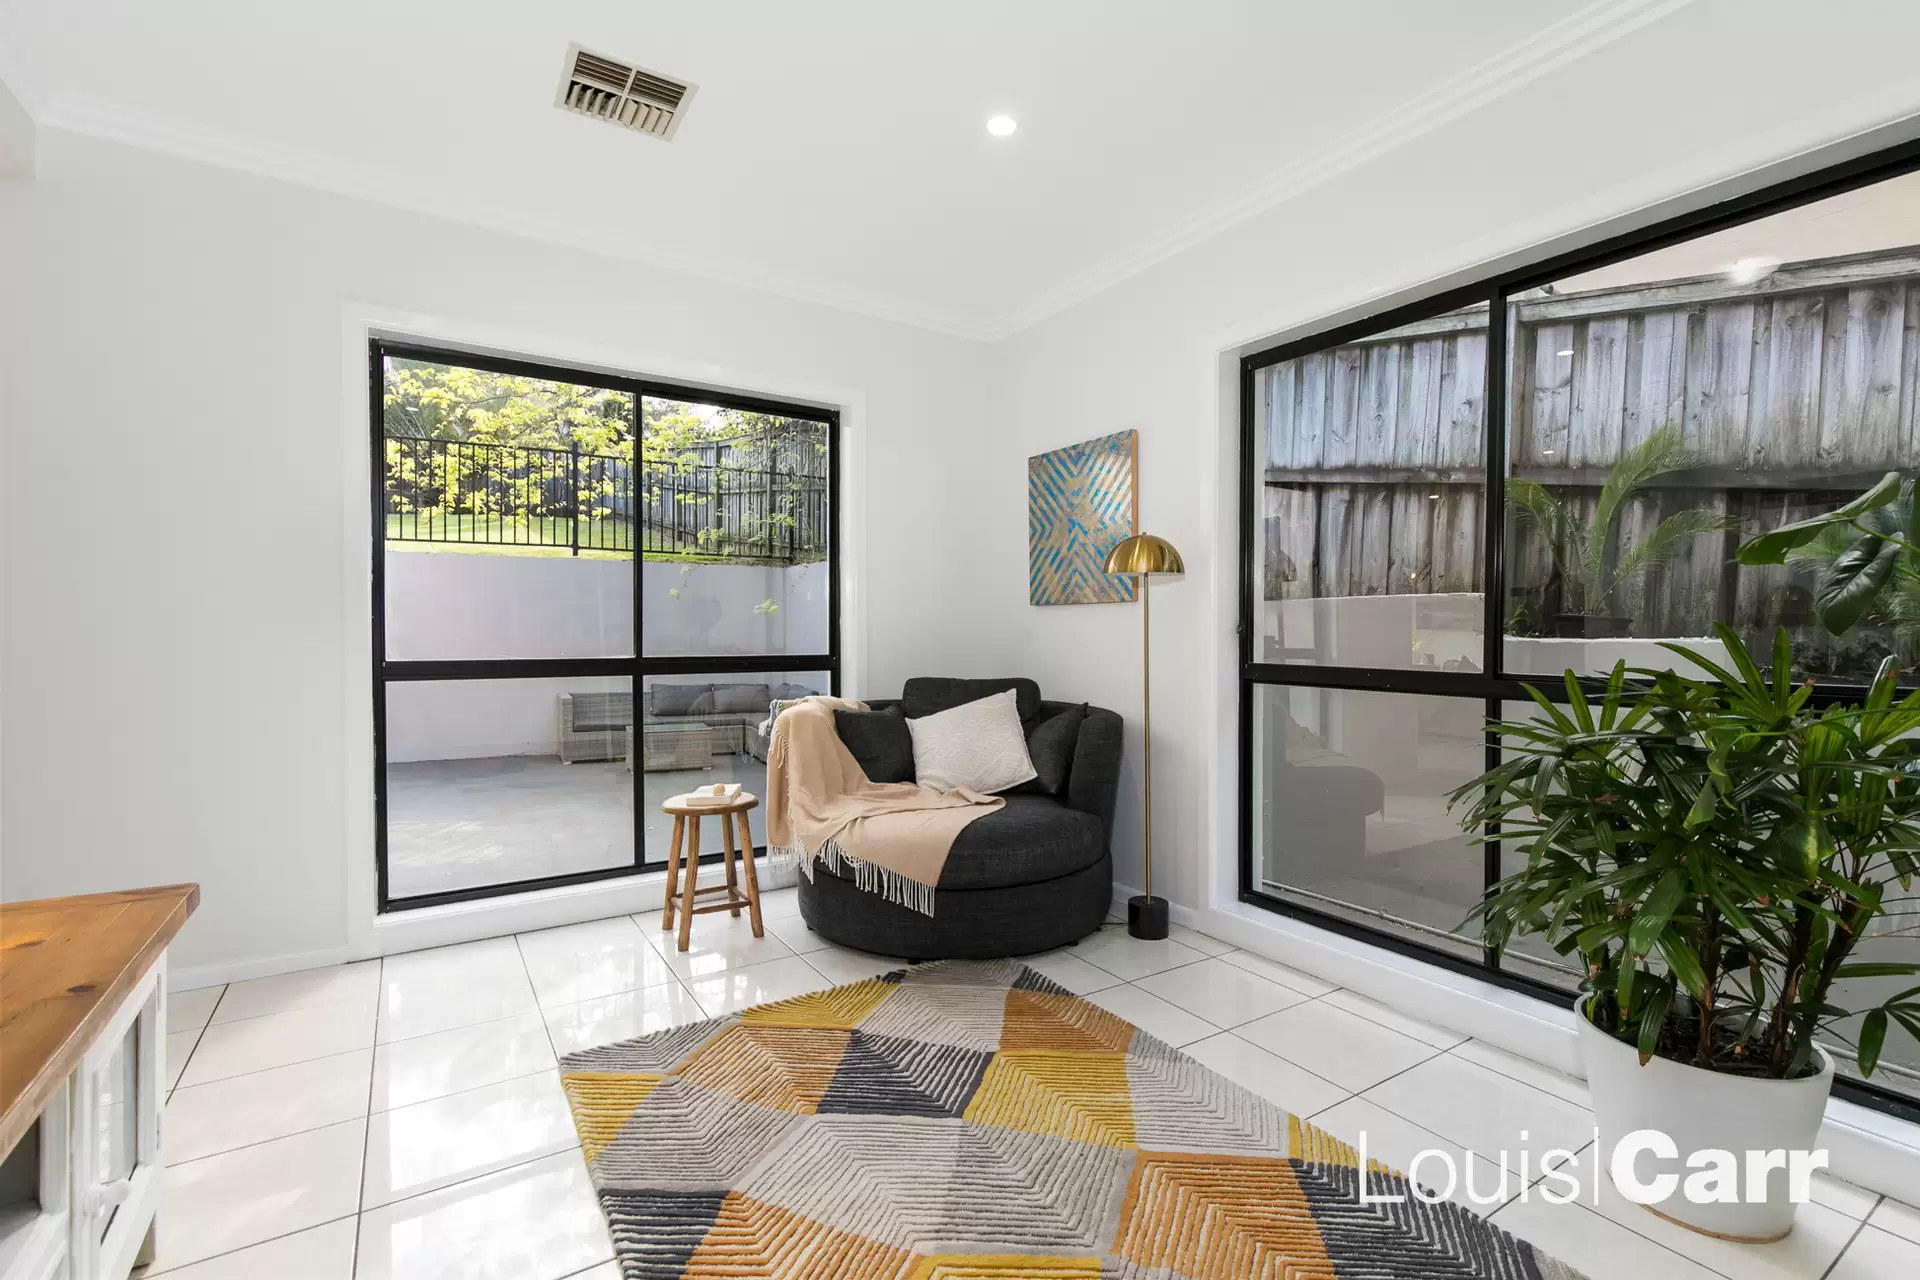 Photo #6: 51 Peartree Circuit, West Pennant Hills - Sold by Louis Carr Real Estate